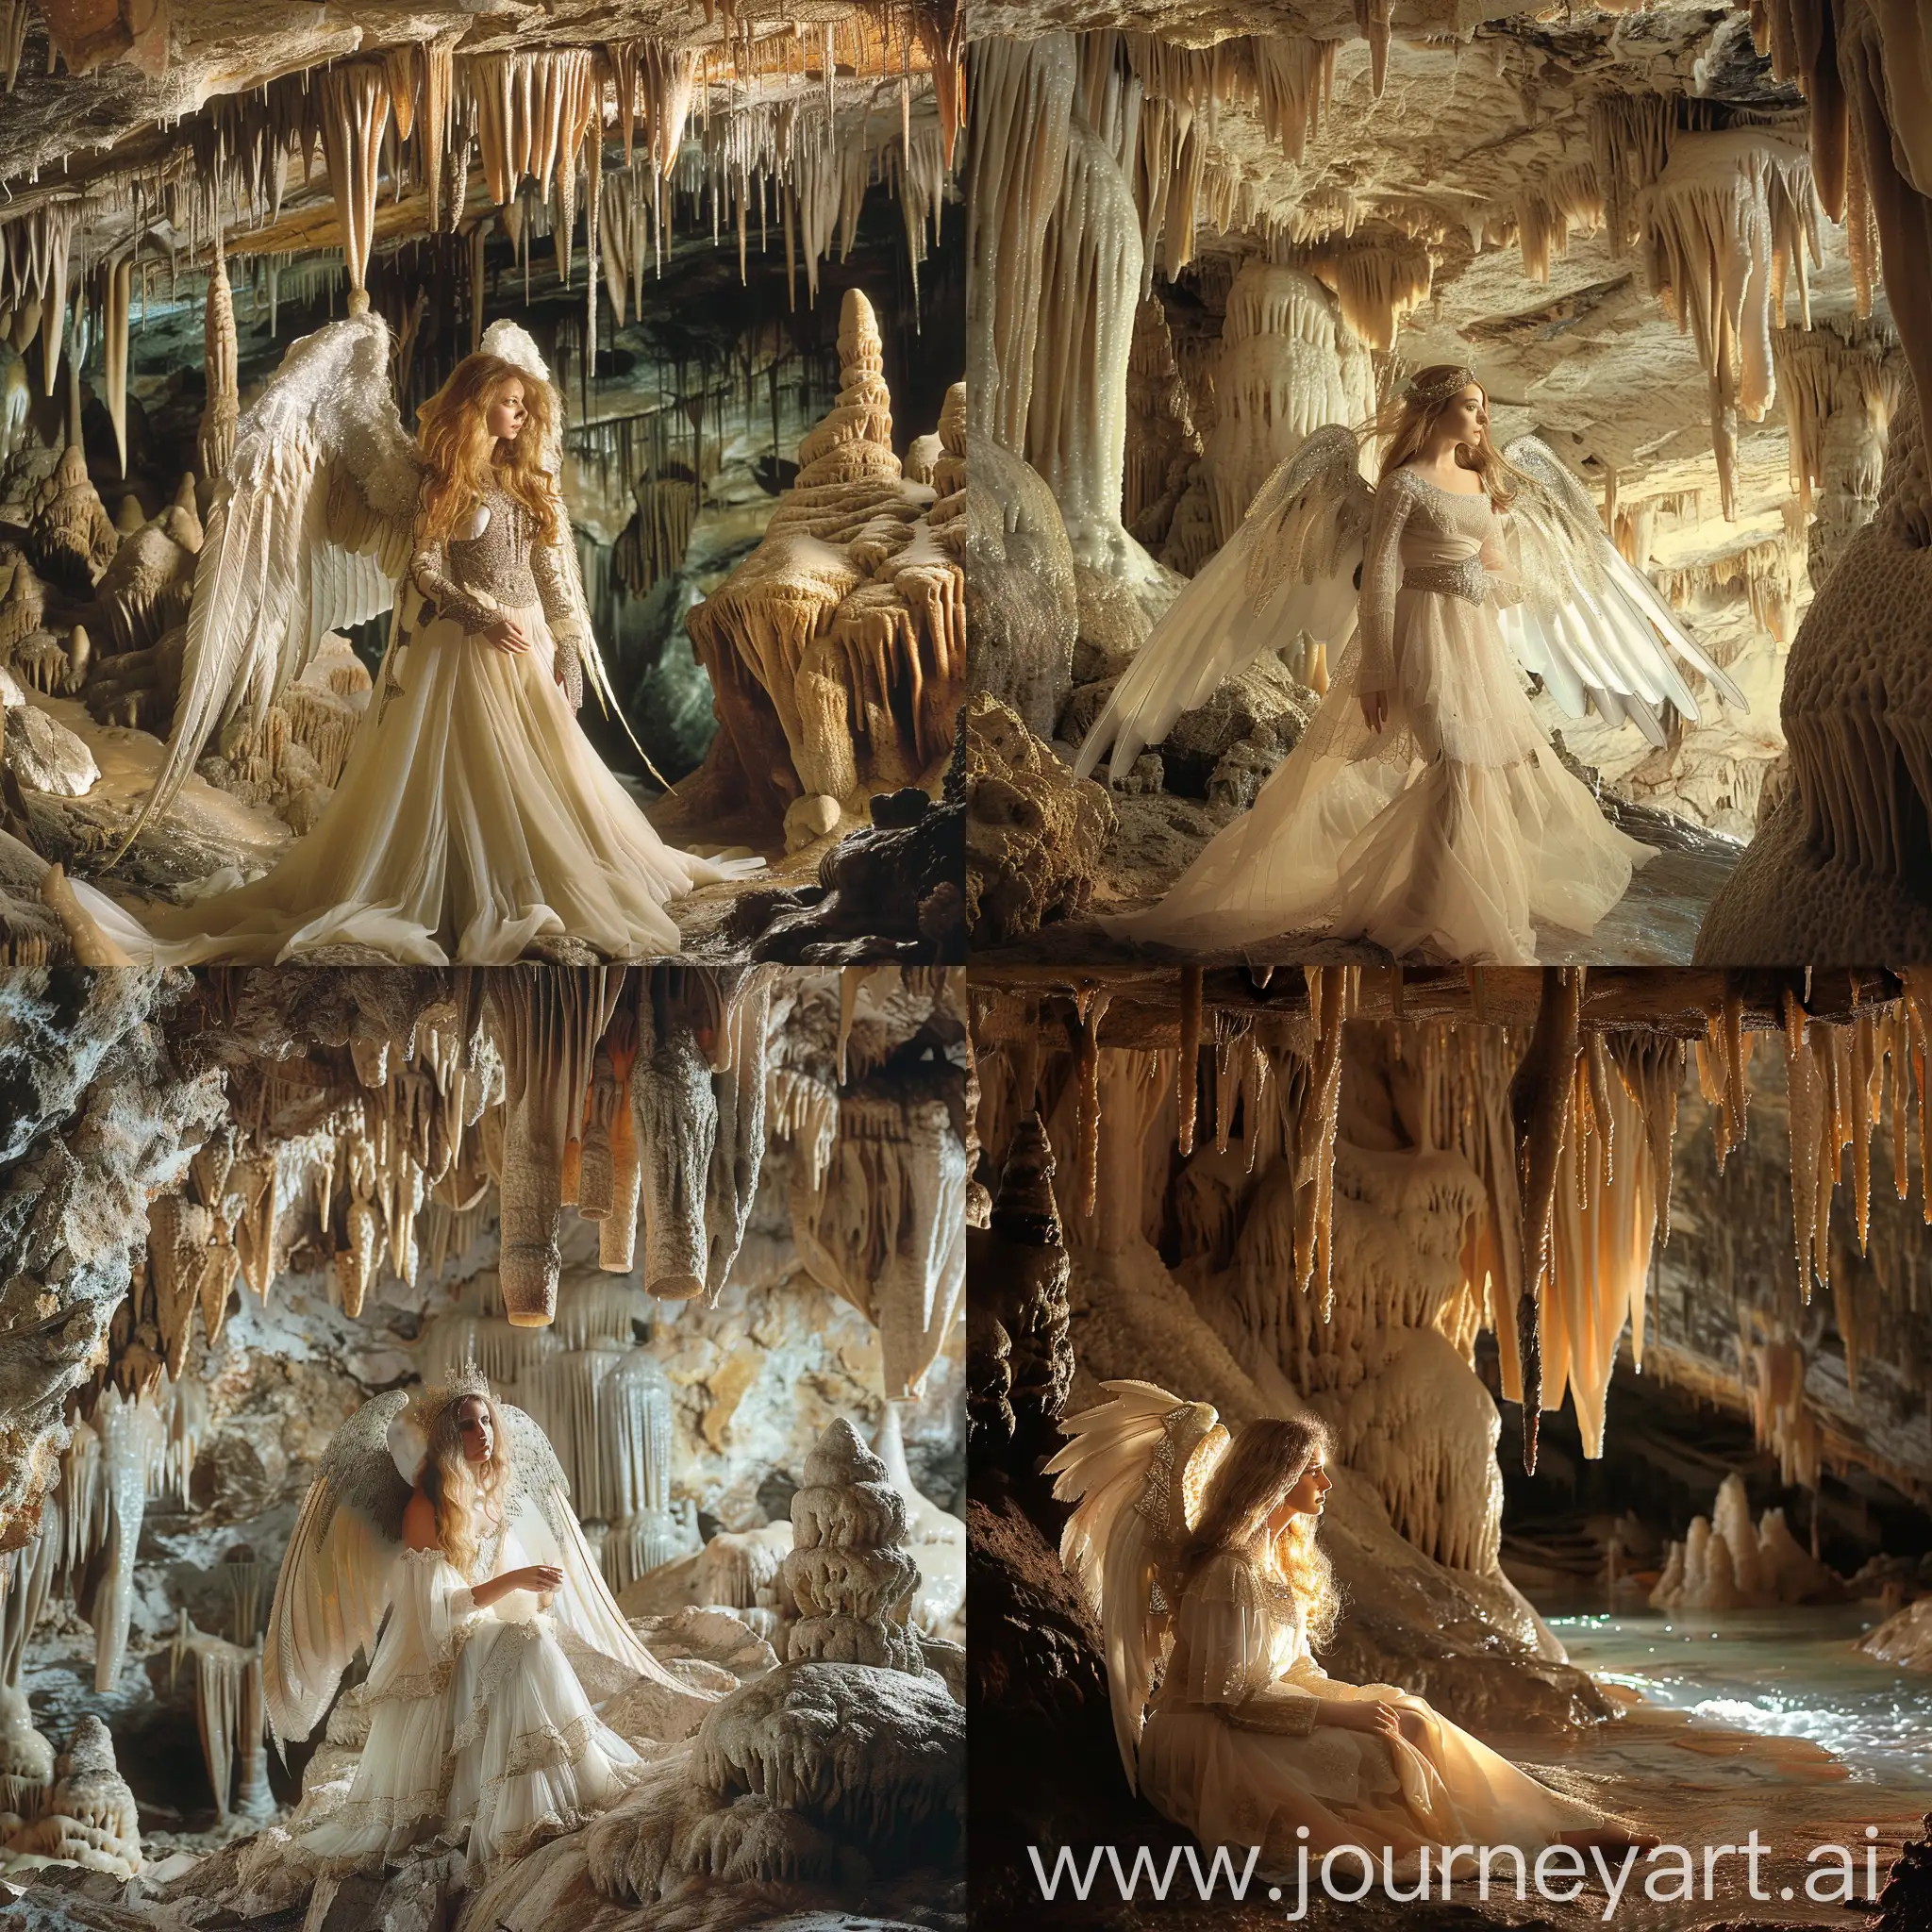 A beautiful medieval angel woman in a cave with stalactites and stalagmites.